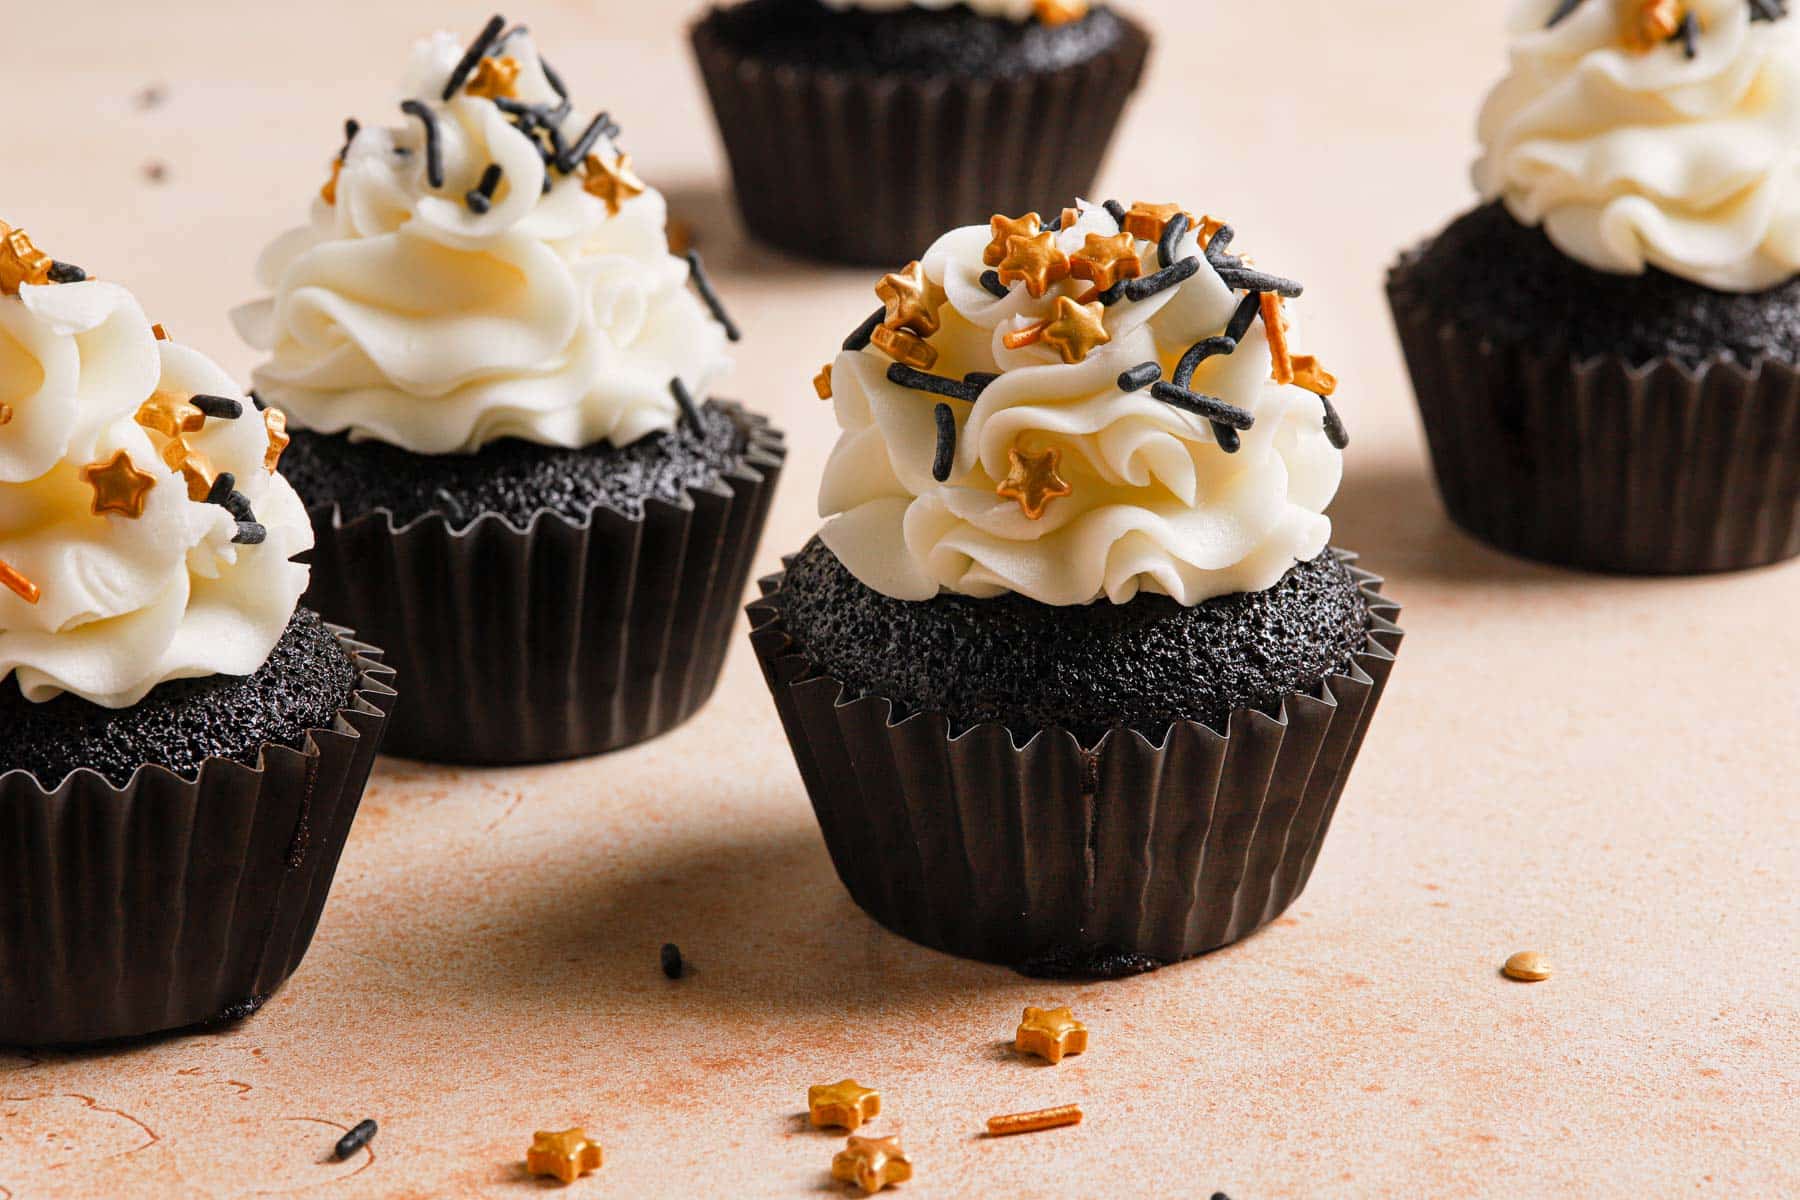 Homemade Black Cocoa Cupcakes are decorated with white meringue cream and topped with black, gold, and gold star sprinkles.